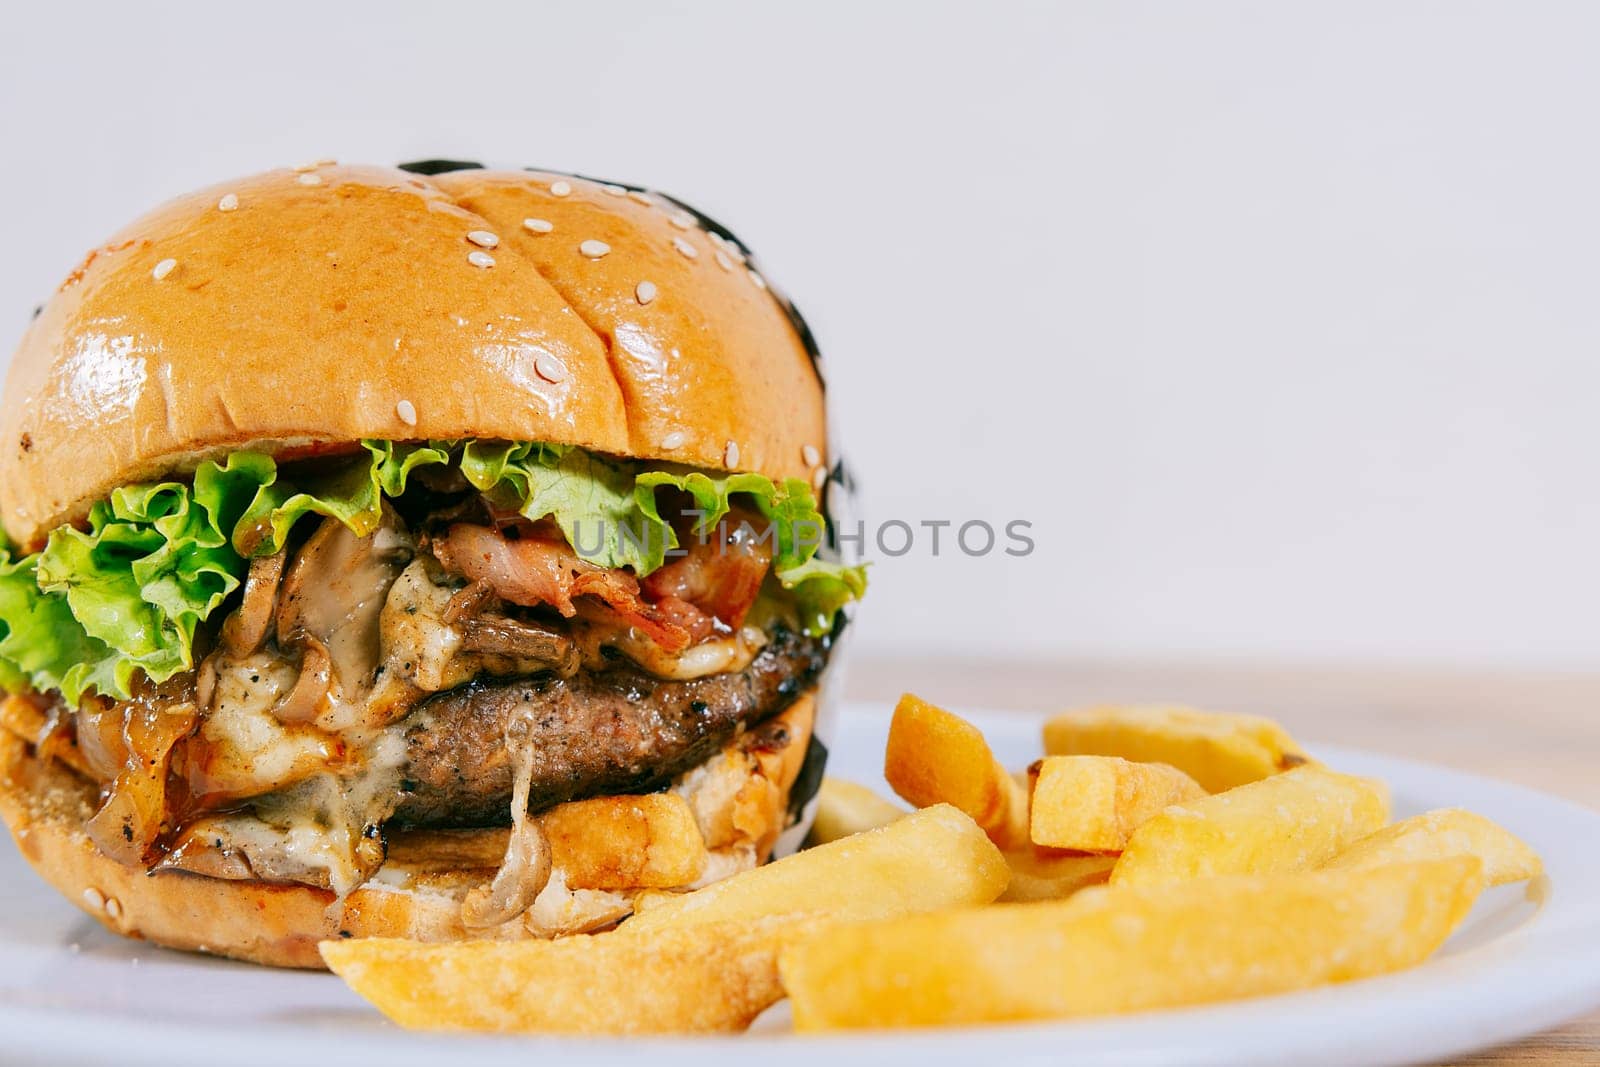 Big cheeseburger with fries served with copy space. Homemade burger with french fries on a plate on wooden table